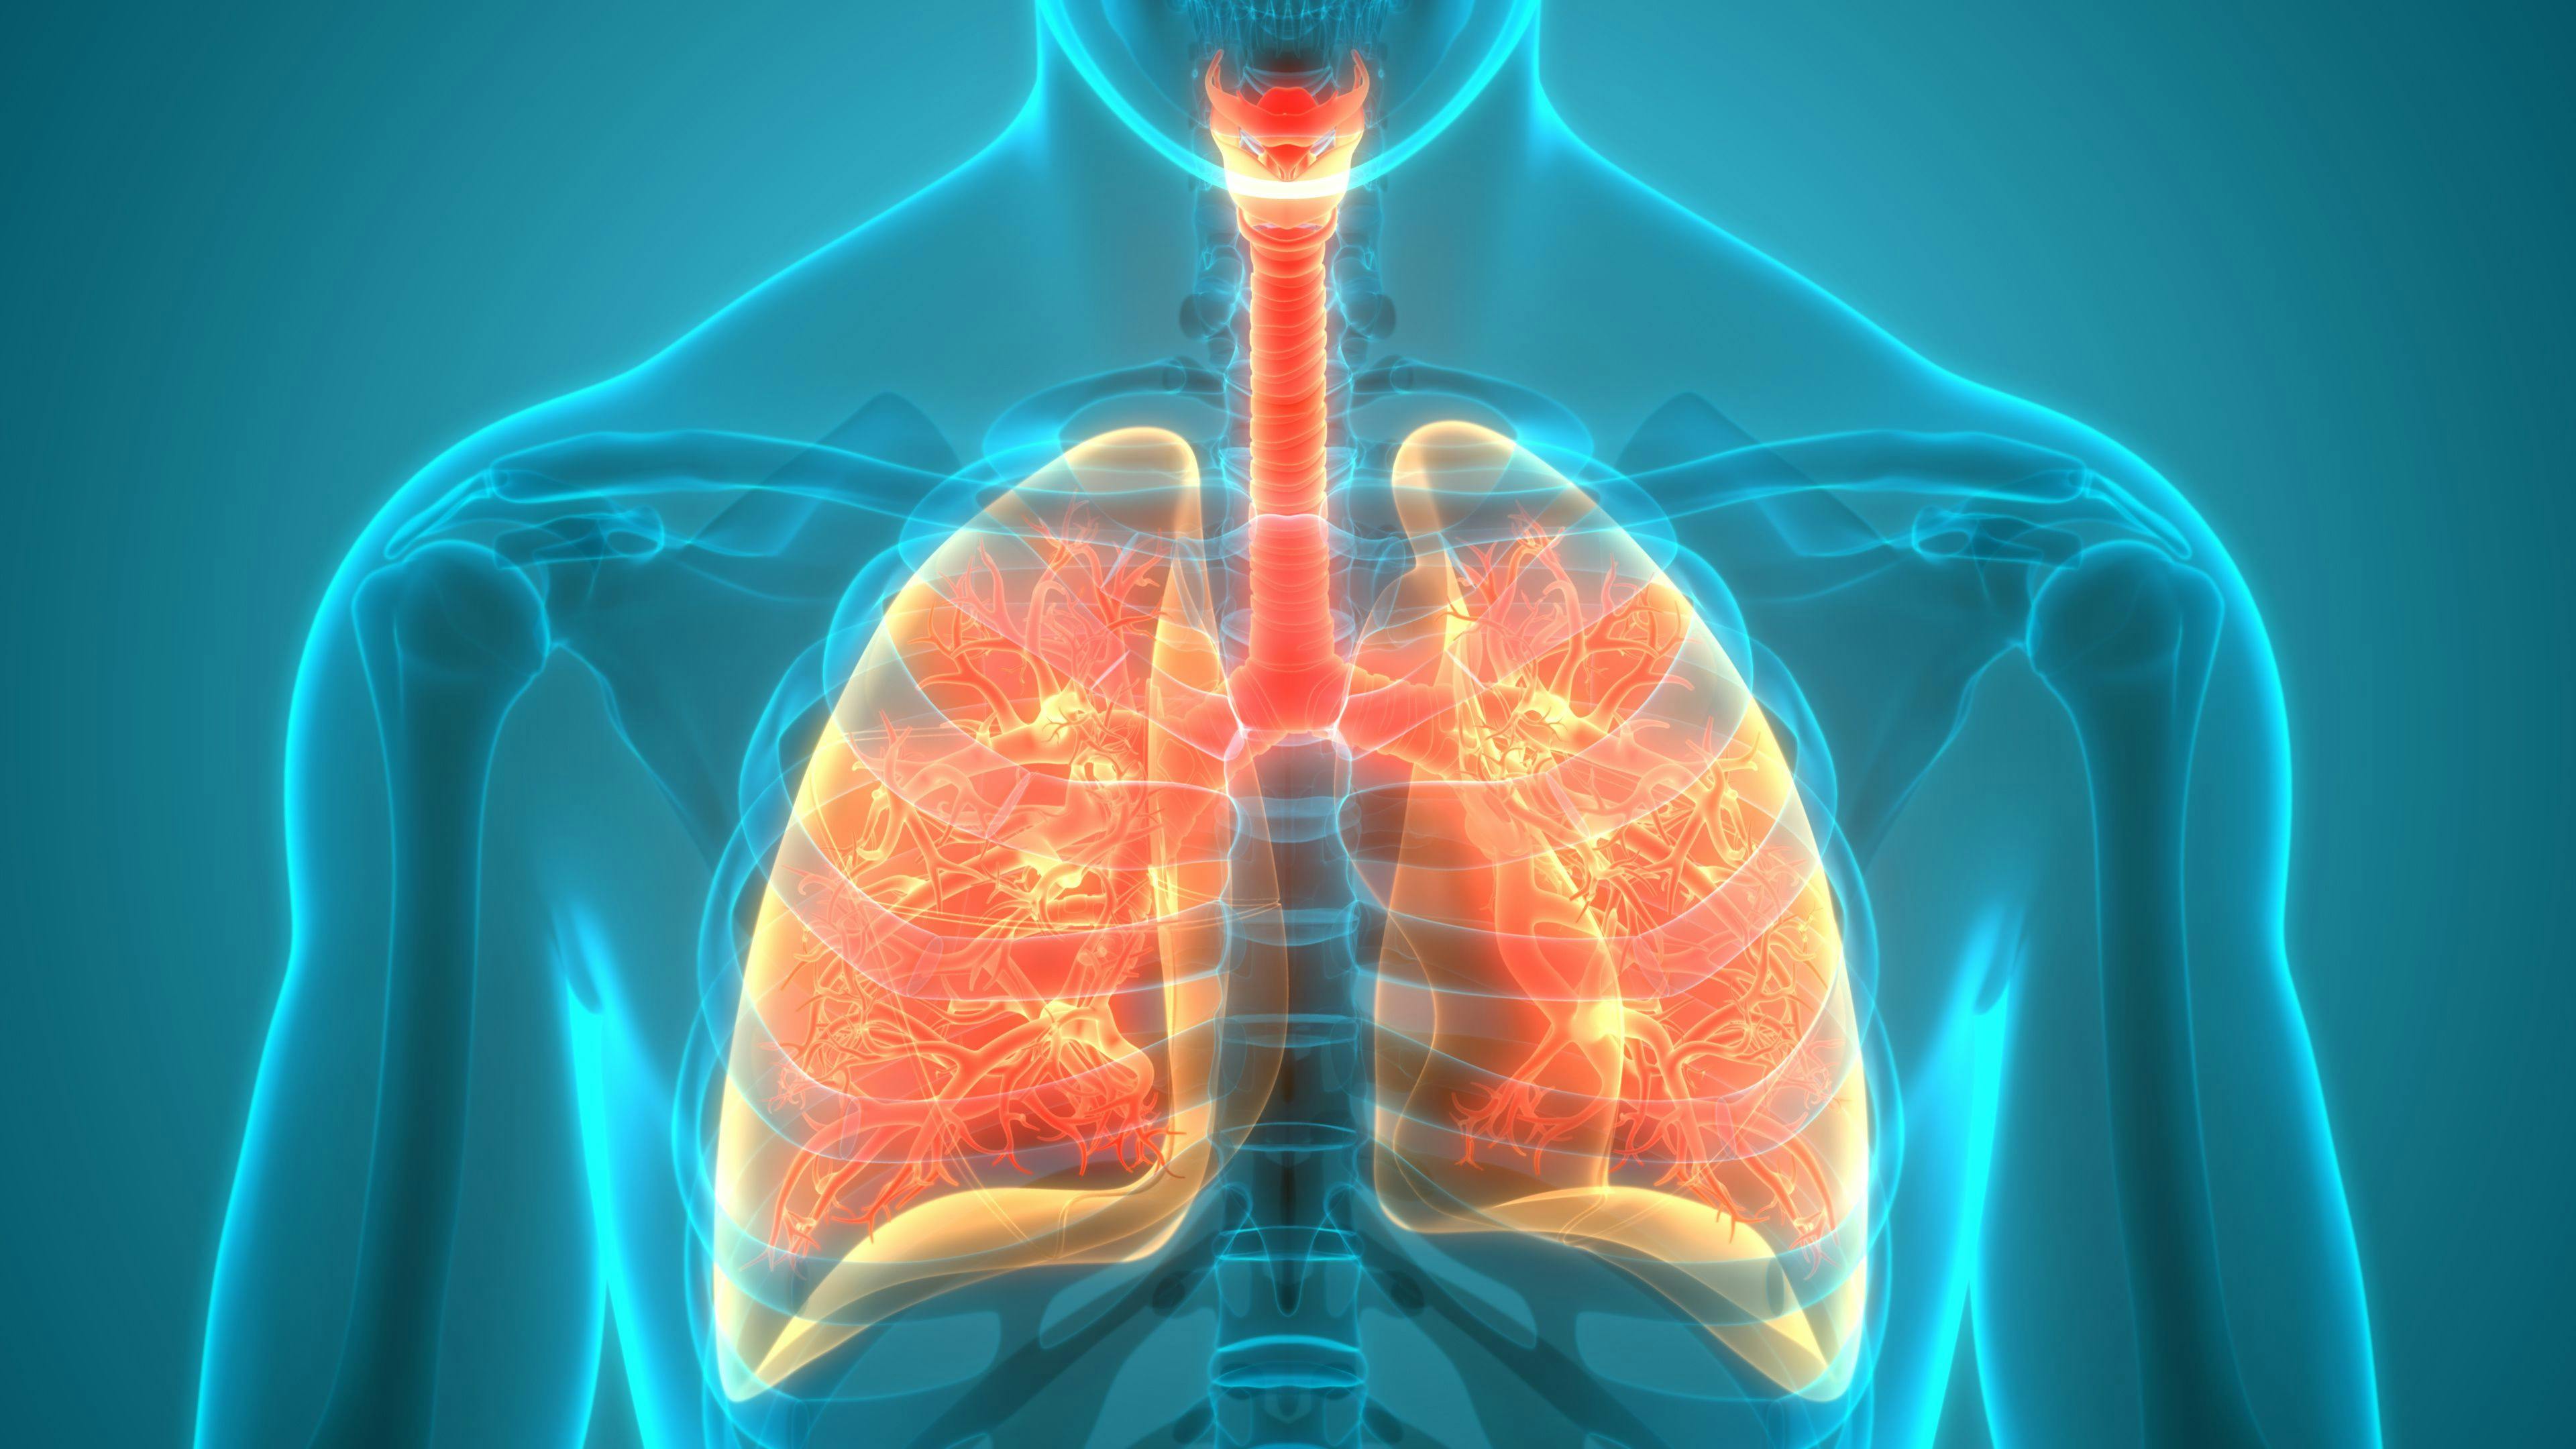 Tezepelumab Cuts Severe Asthma Exacerbations by More Than Half, Study Says